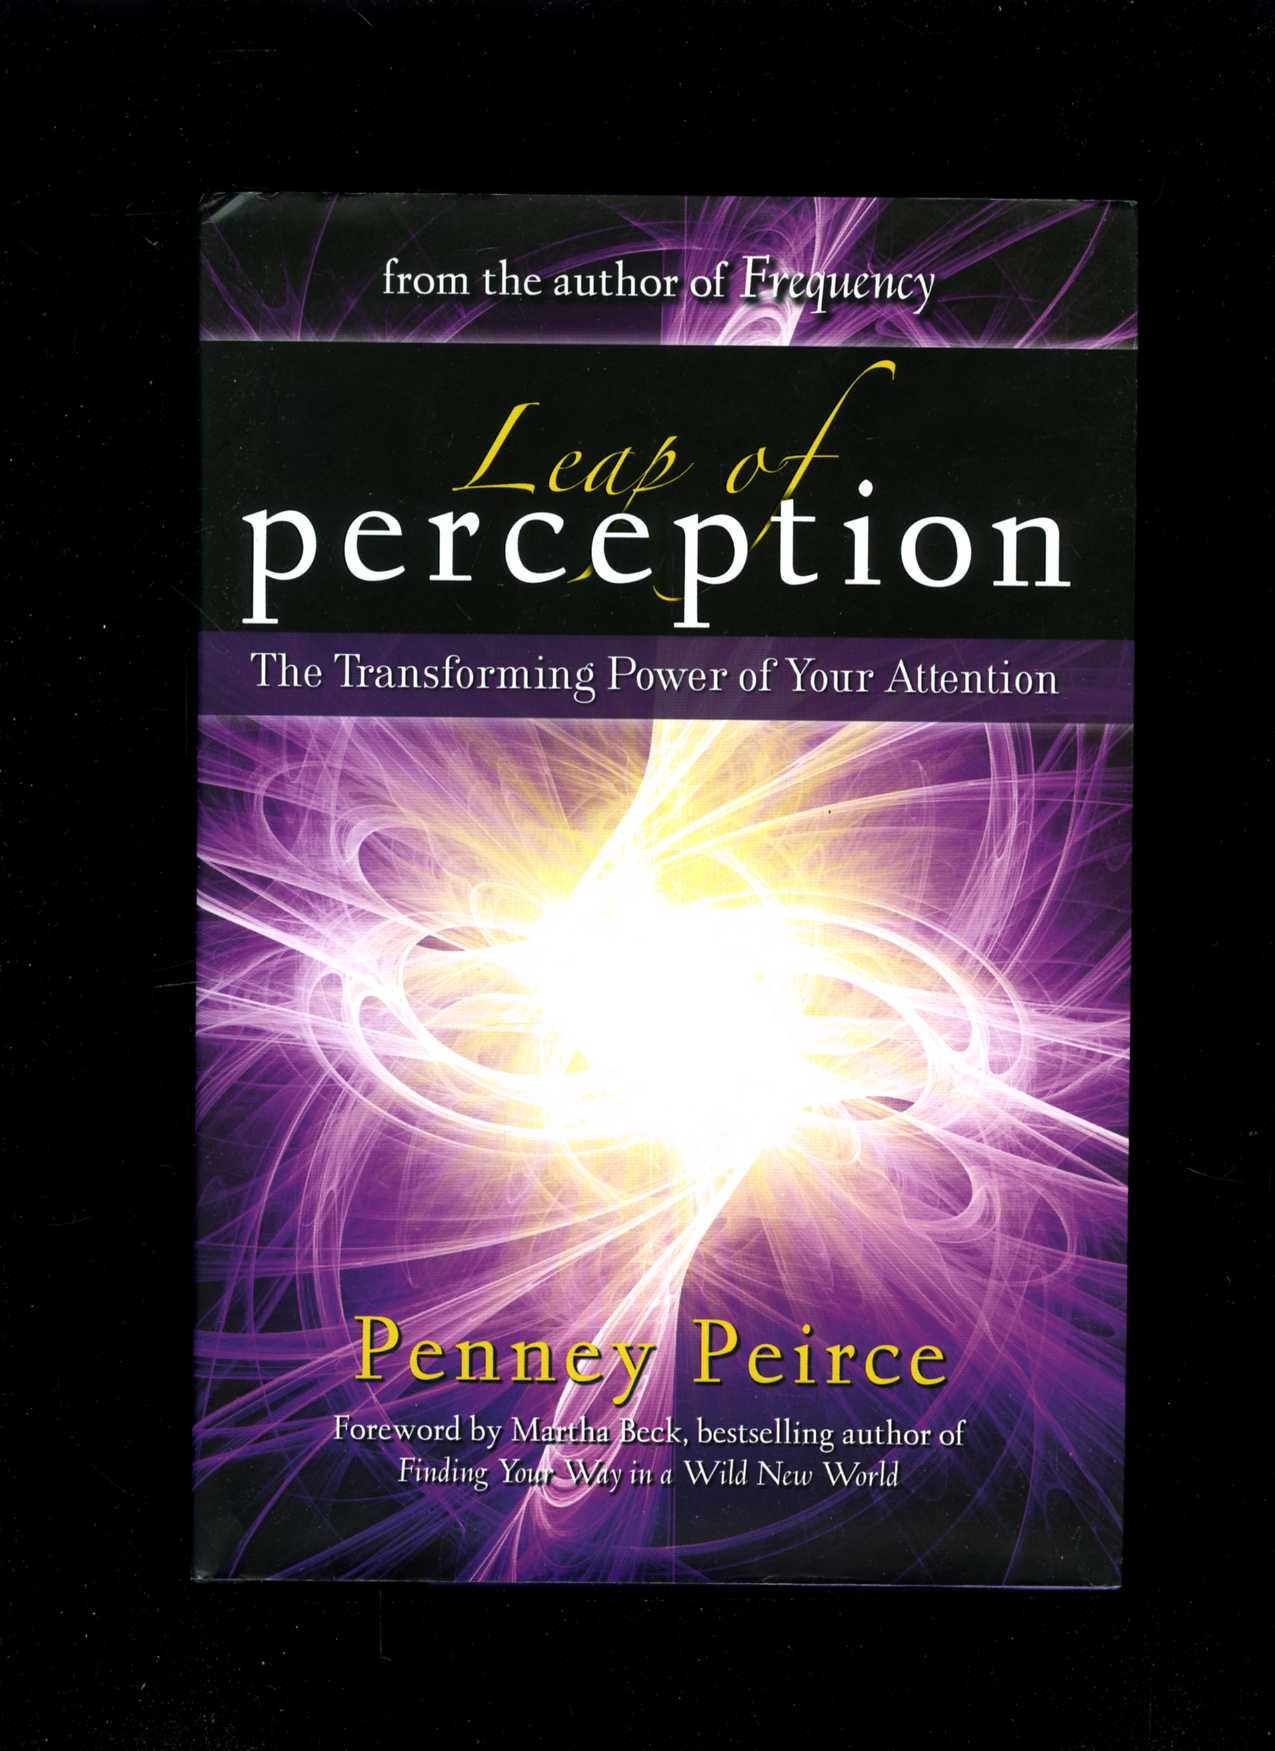 Leap of Perception (Penney Peirce)